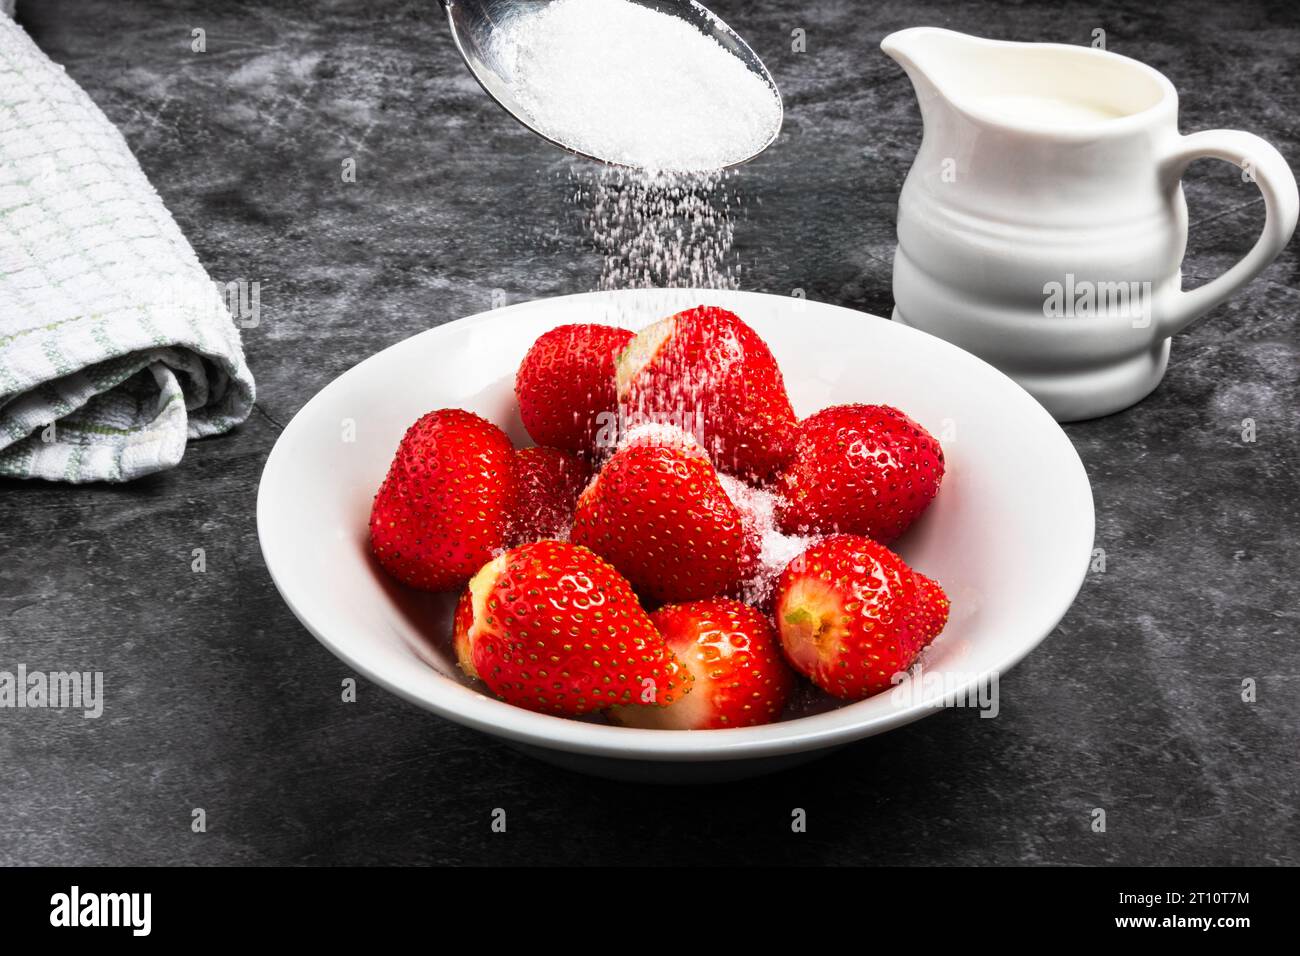 pouring sugar on a bowl of strawberries Stock Photo